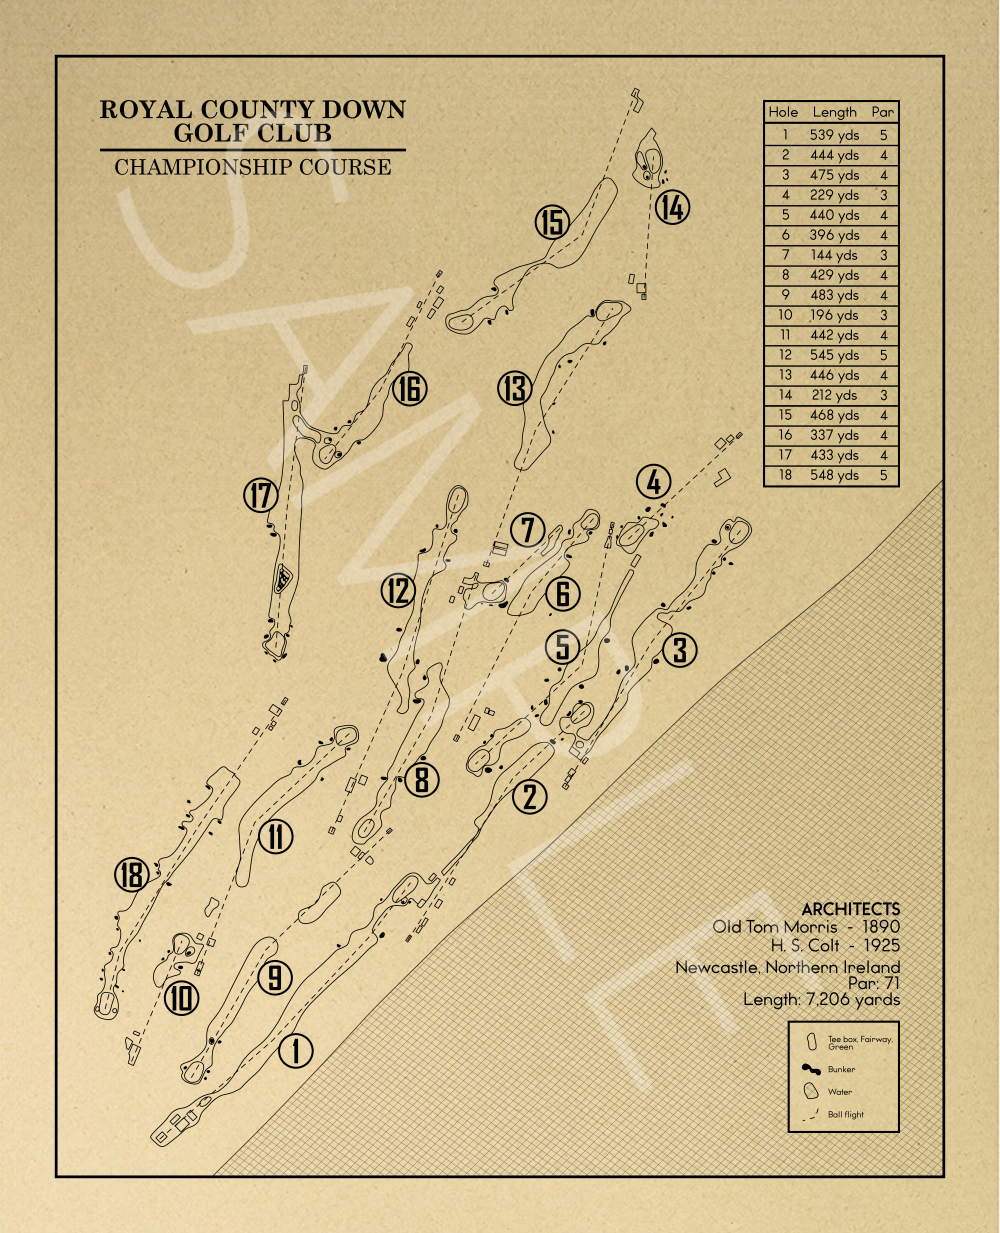 Royal County Down Golf Club Championship Course Outline (Print)